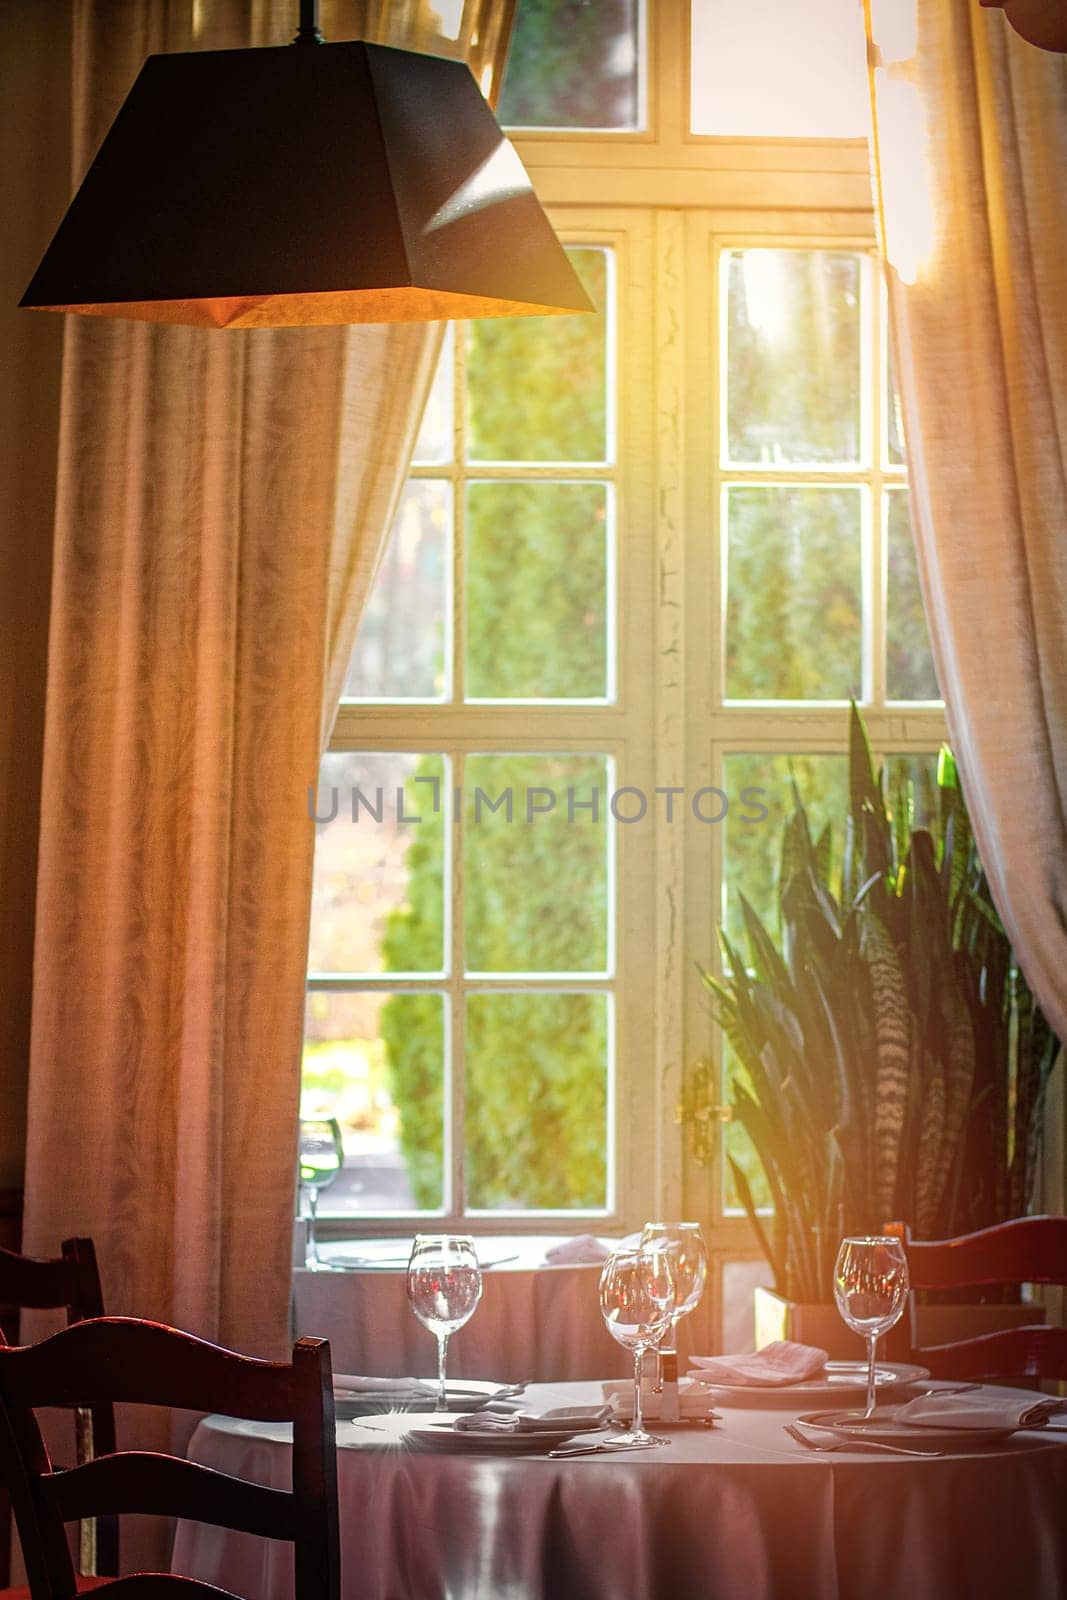 Dining table set with wine glasses by the window in a luxury restaurant interior by hotel.